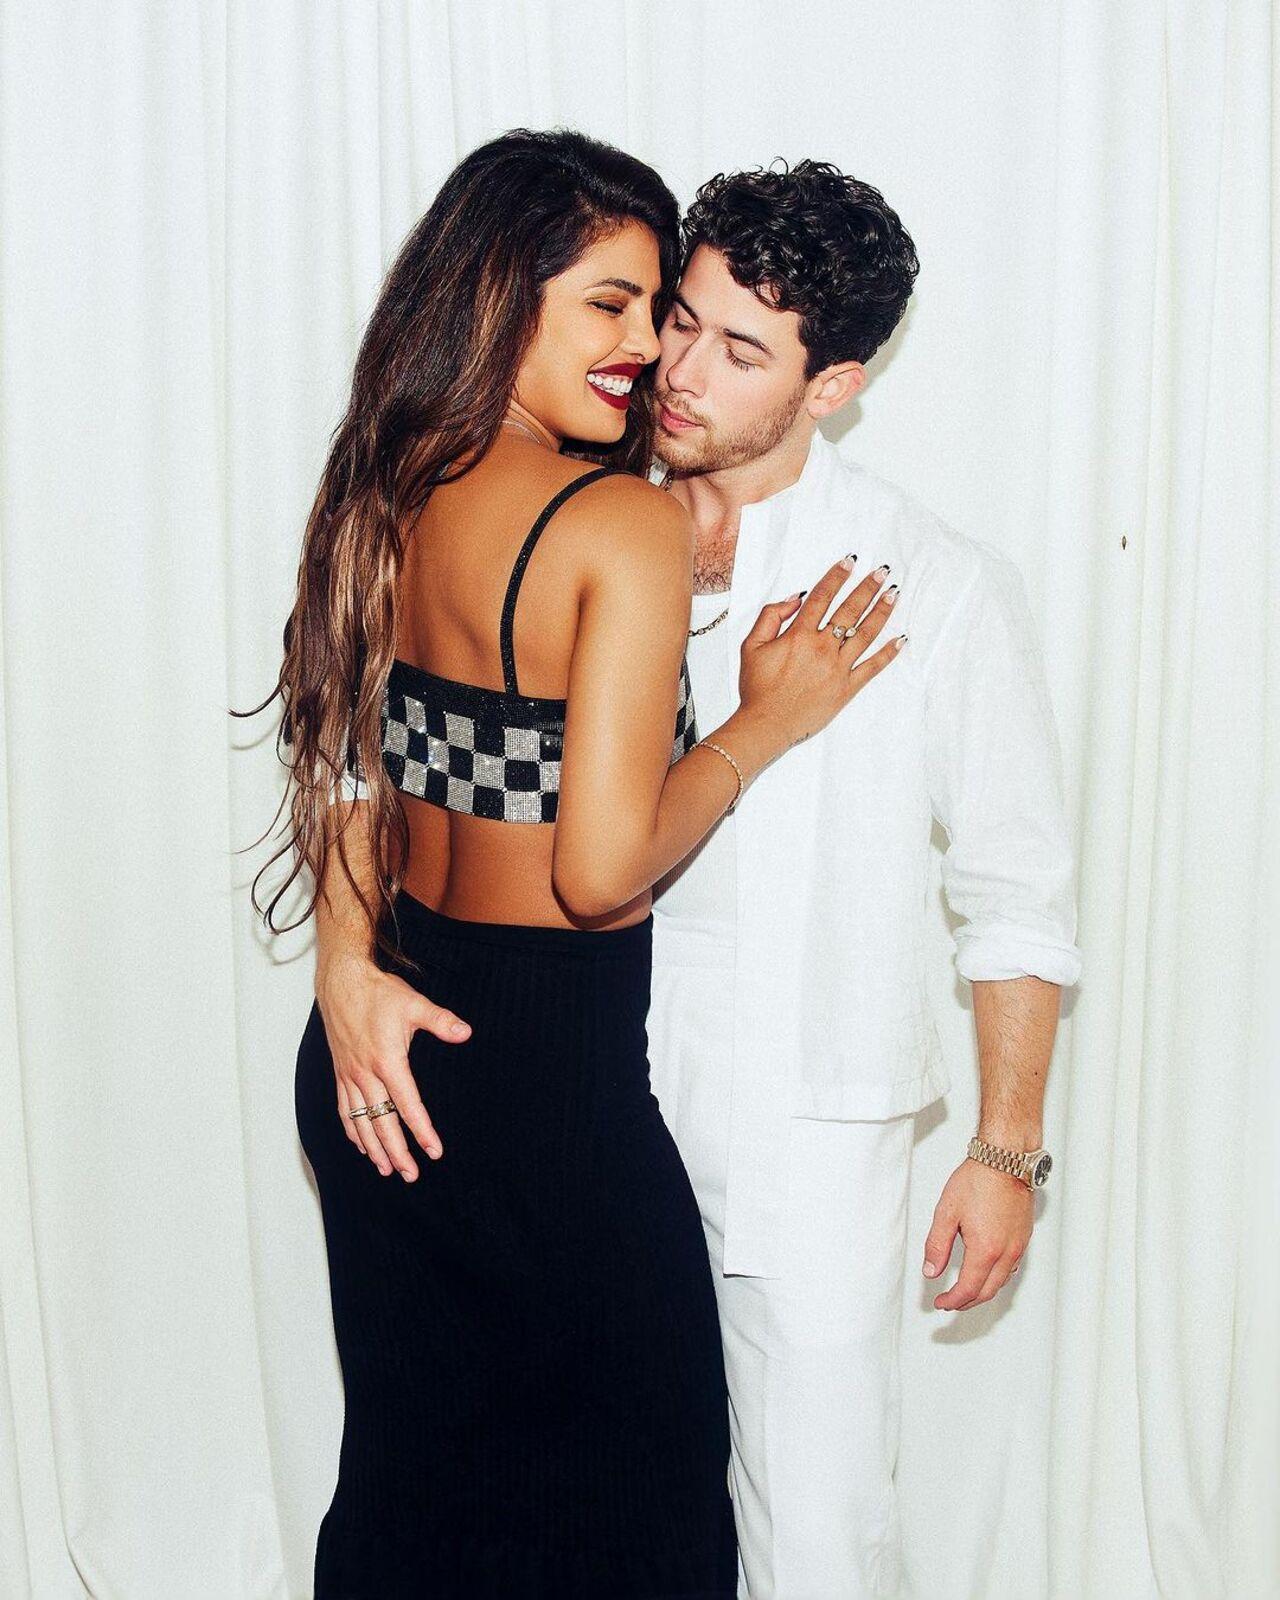 Priyanka Chopra and Nick Jonas make for a hot looking pair as they hug each other in the above pic